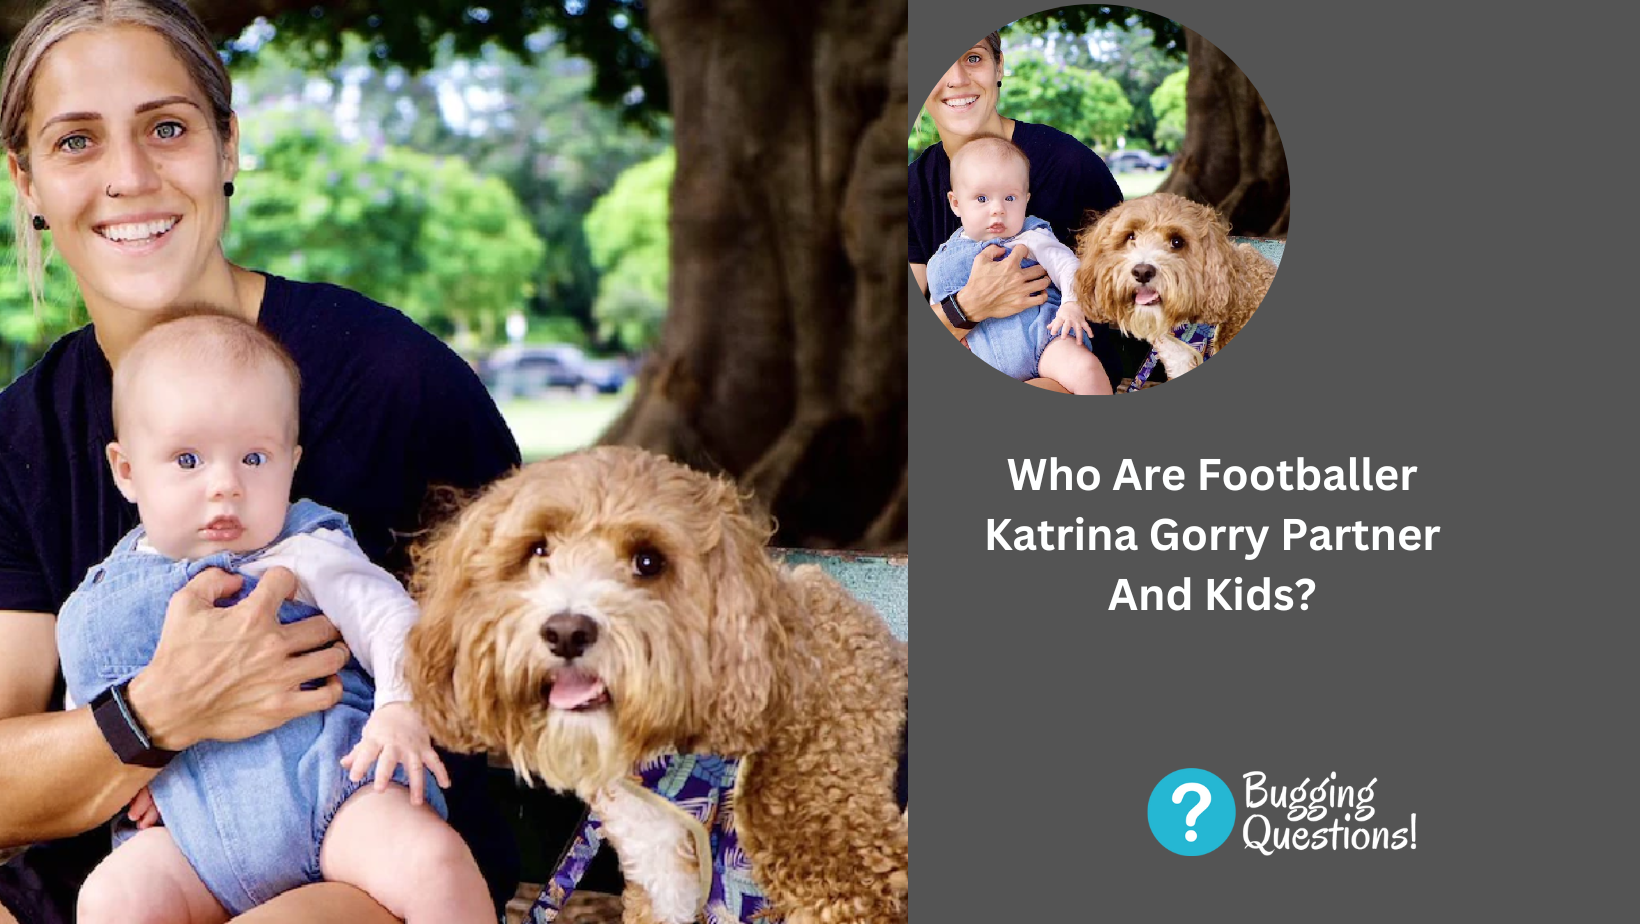 Who Are Footballer Katrina Gorry Partner And Kids? Know More About Their Age And Personal Life